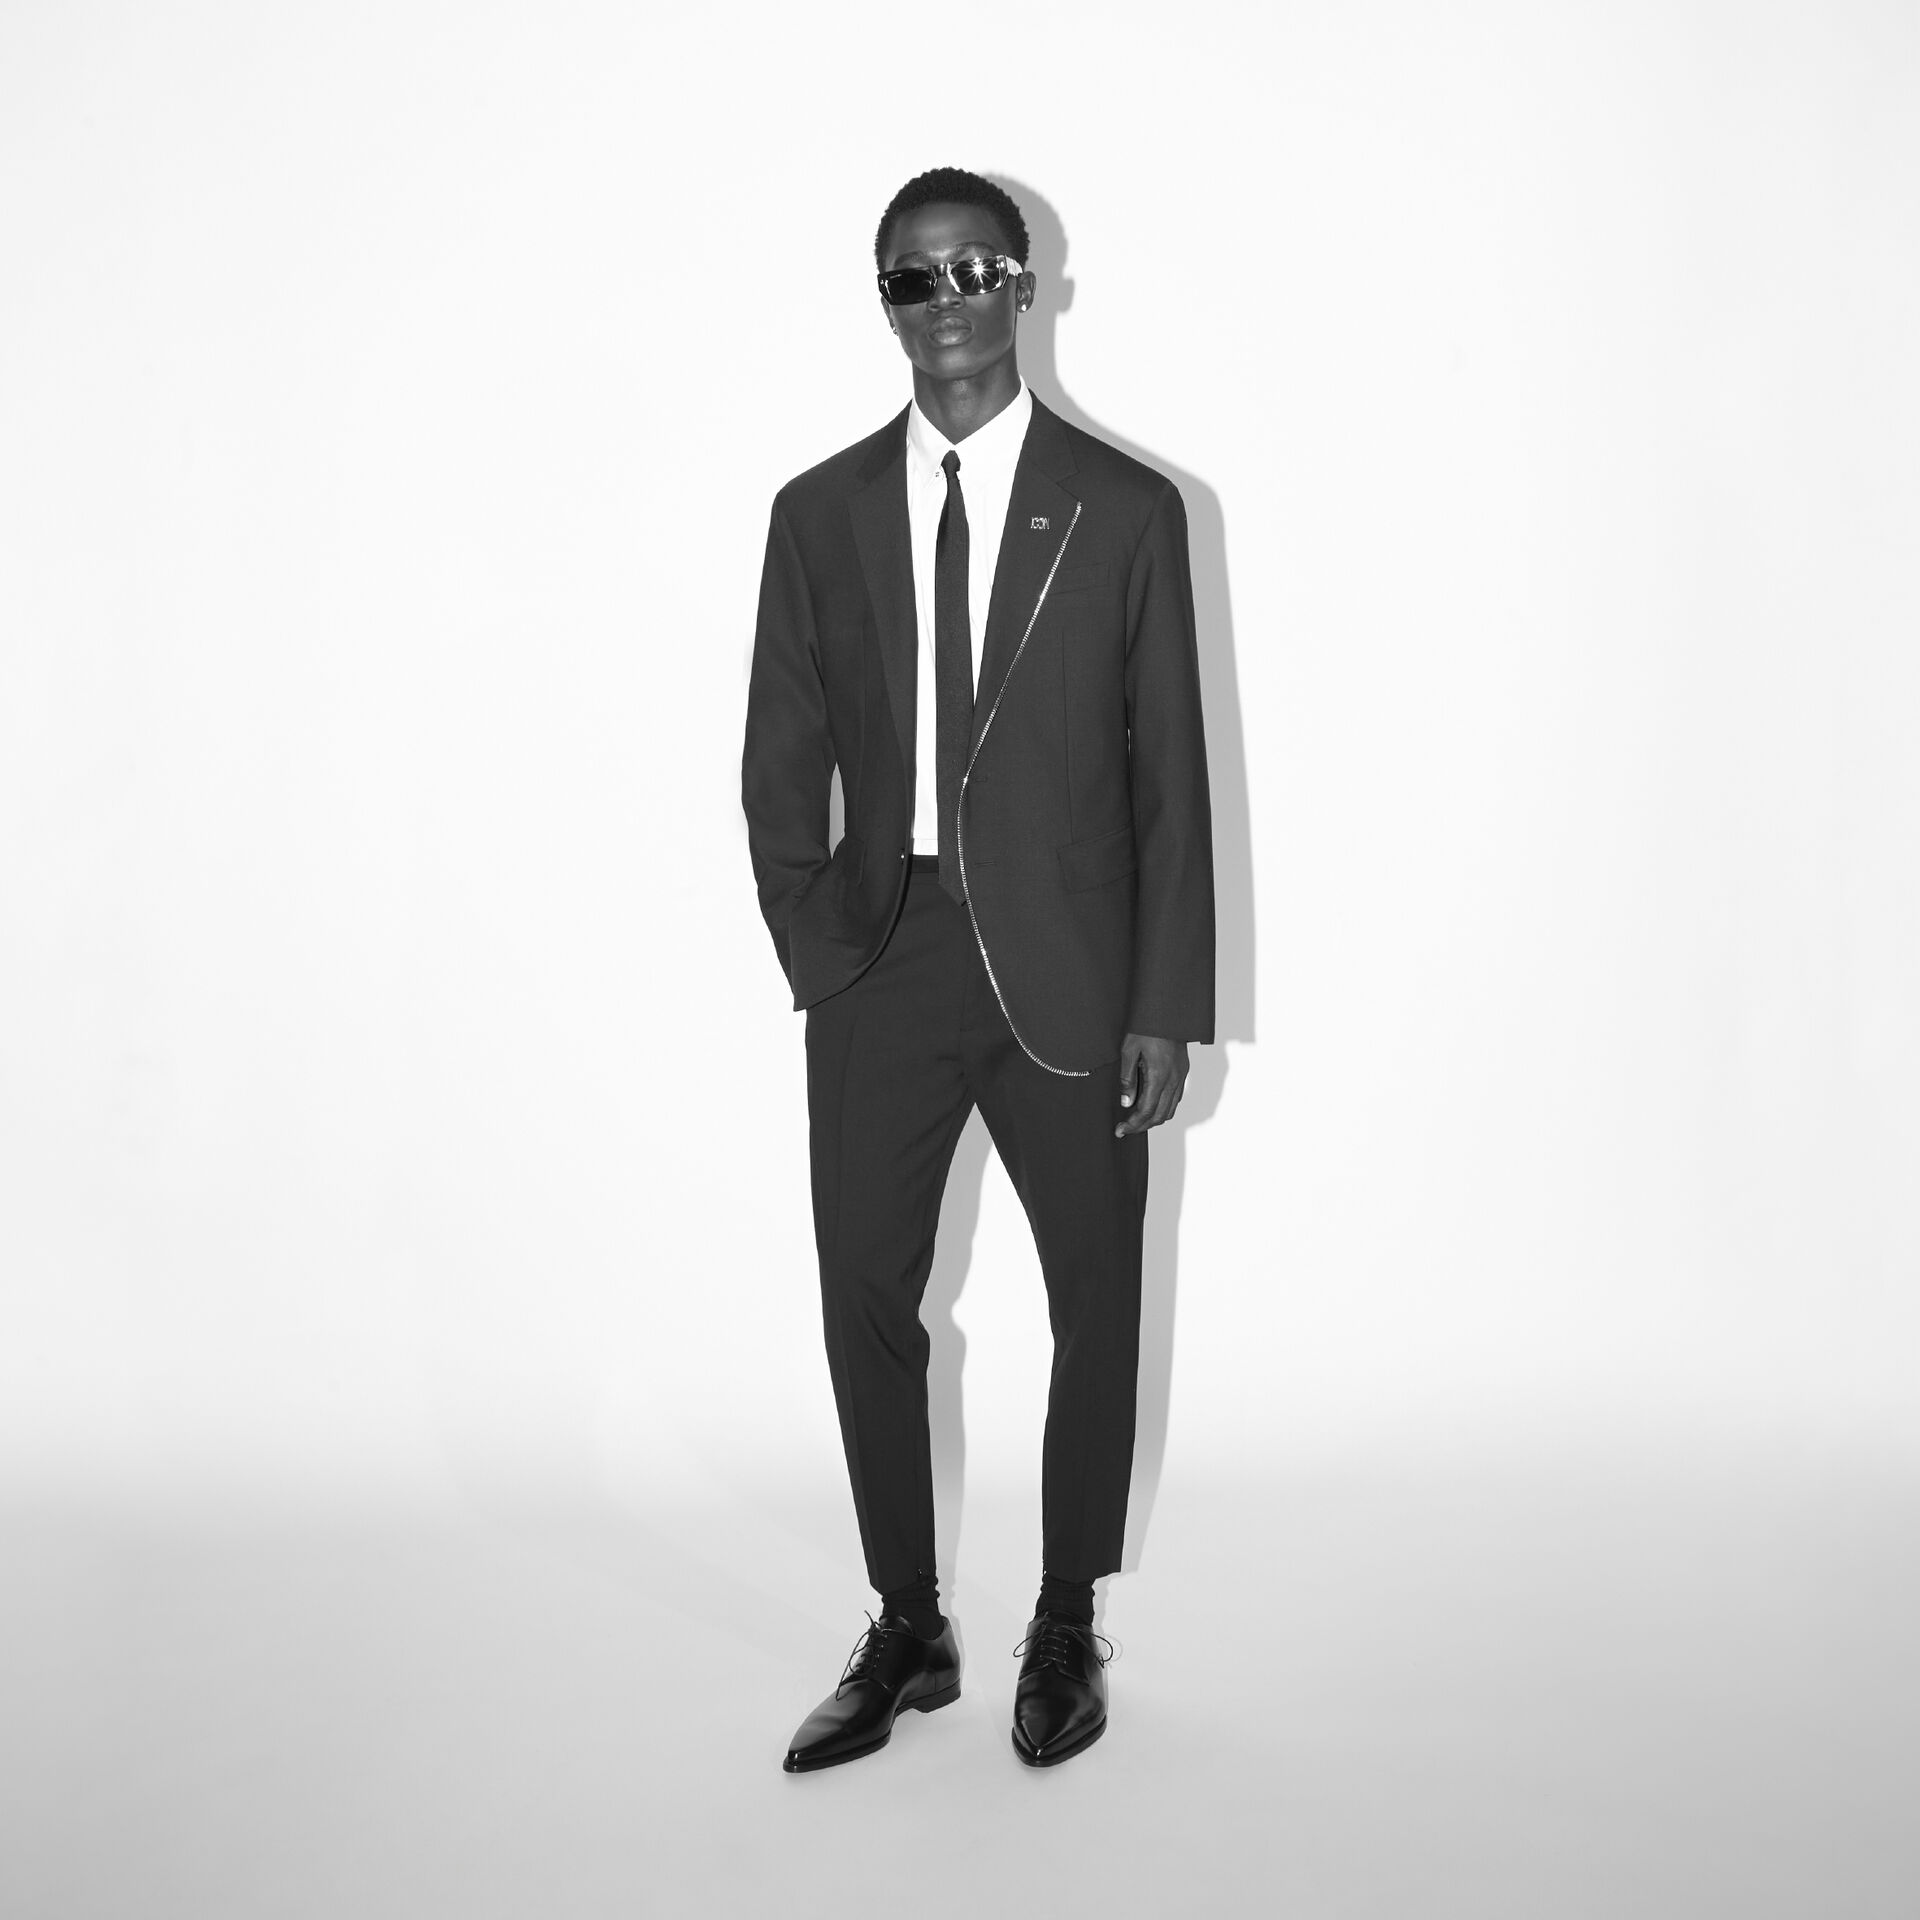 Picture of black and white of man wearing a suit and tie with black sunglasses